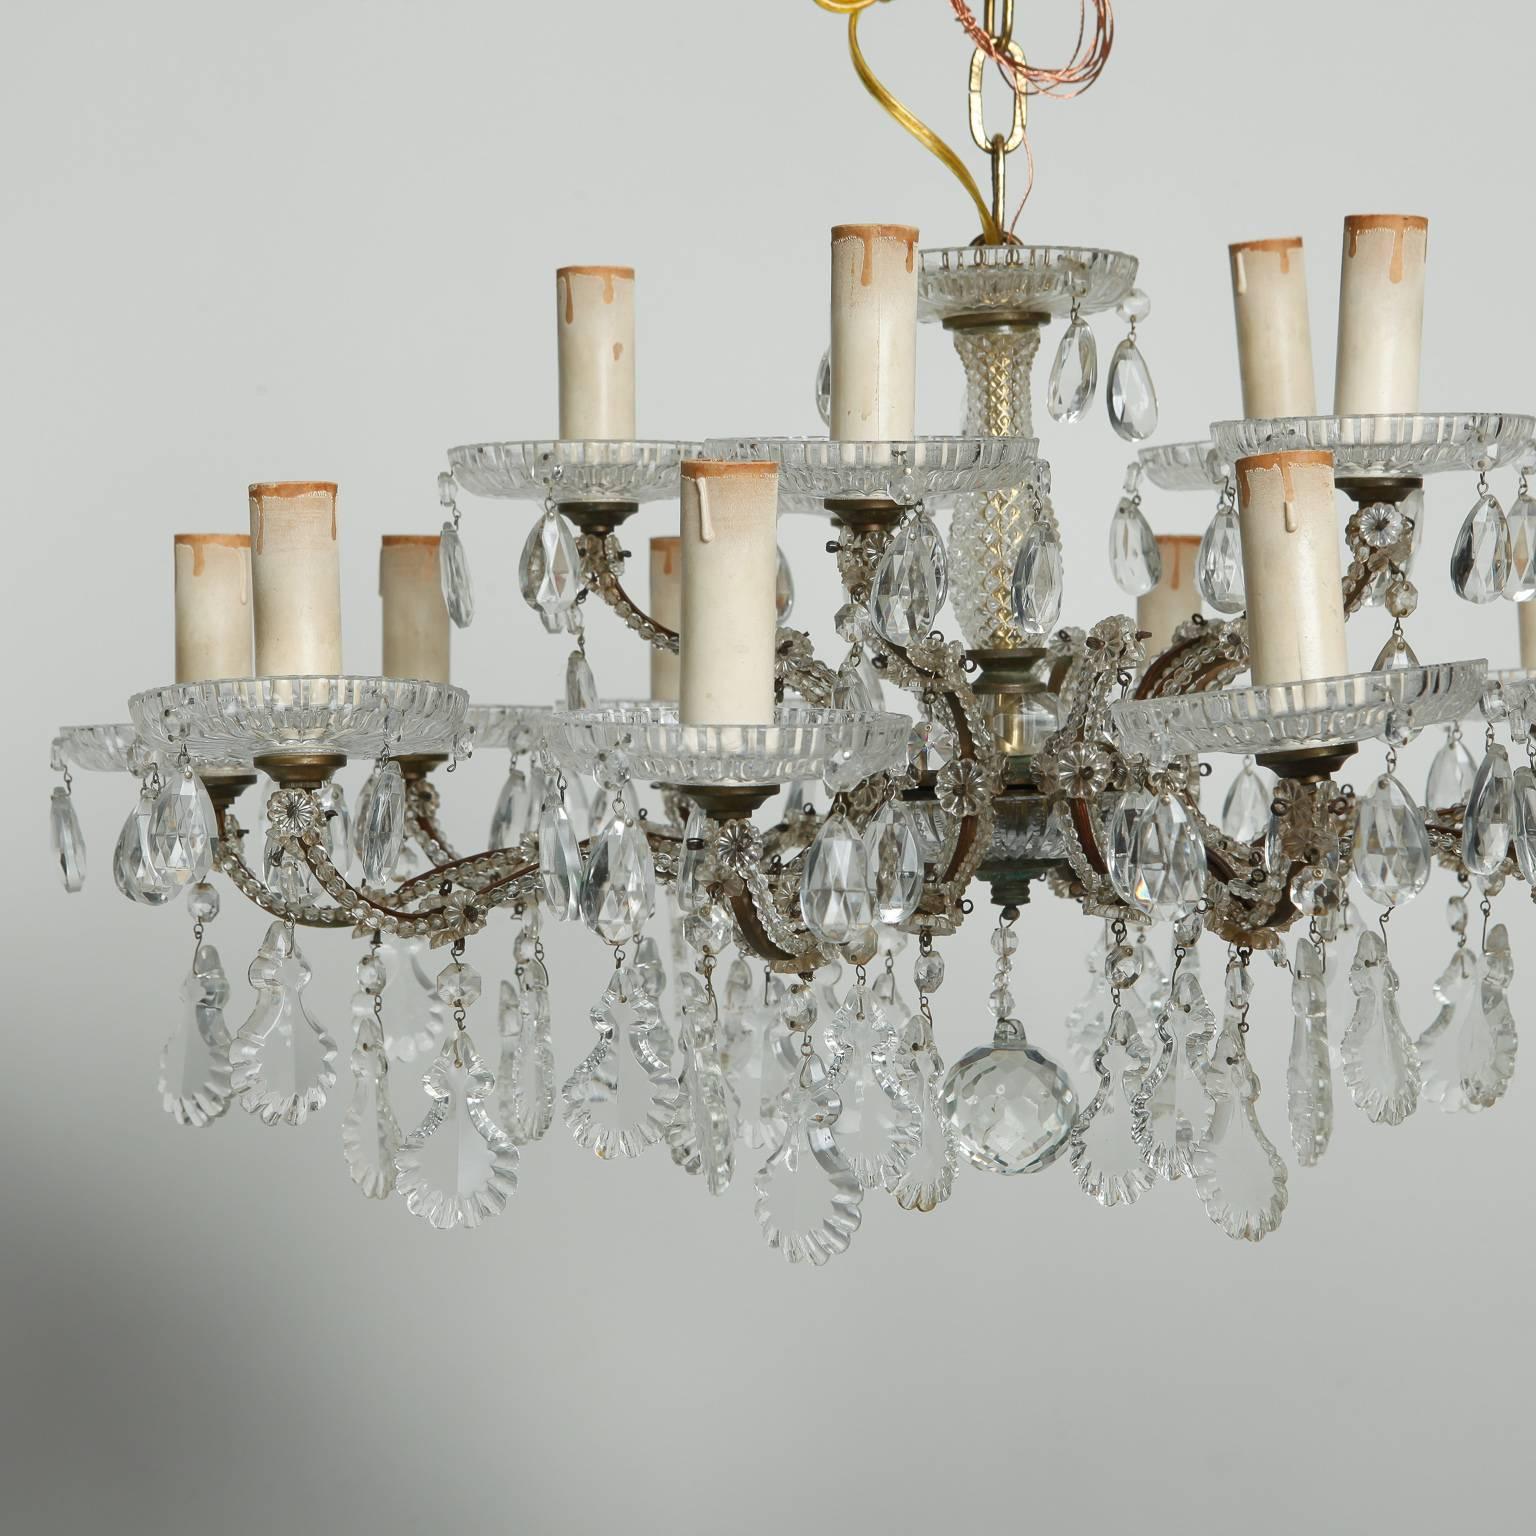 20th Century French Fifteen-Light Shallow Beaded Crystal Chandelier